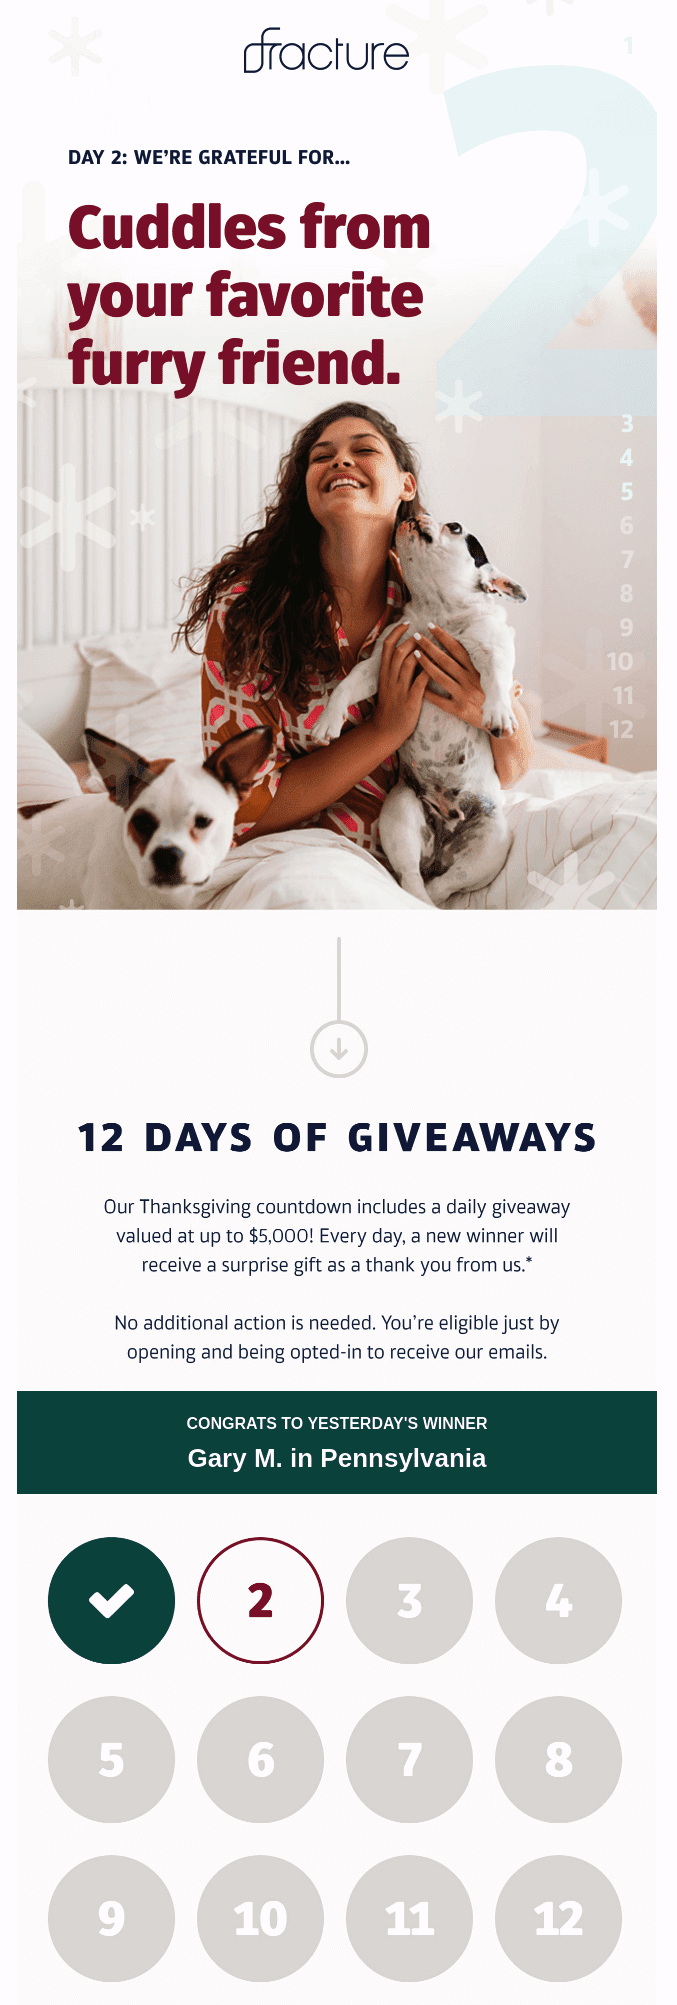 Holiday marketing email marketing campaign that shows a girl holding a puppy and 12 circles that represent 12 days of prizes. 